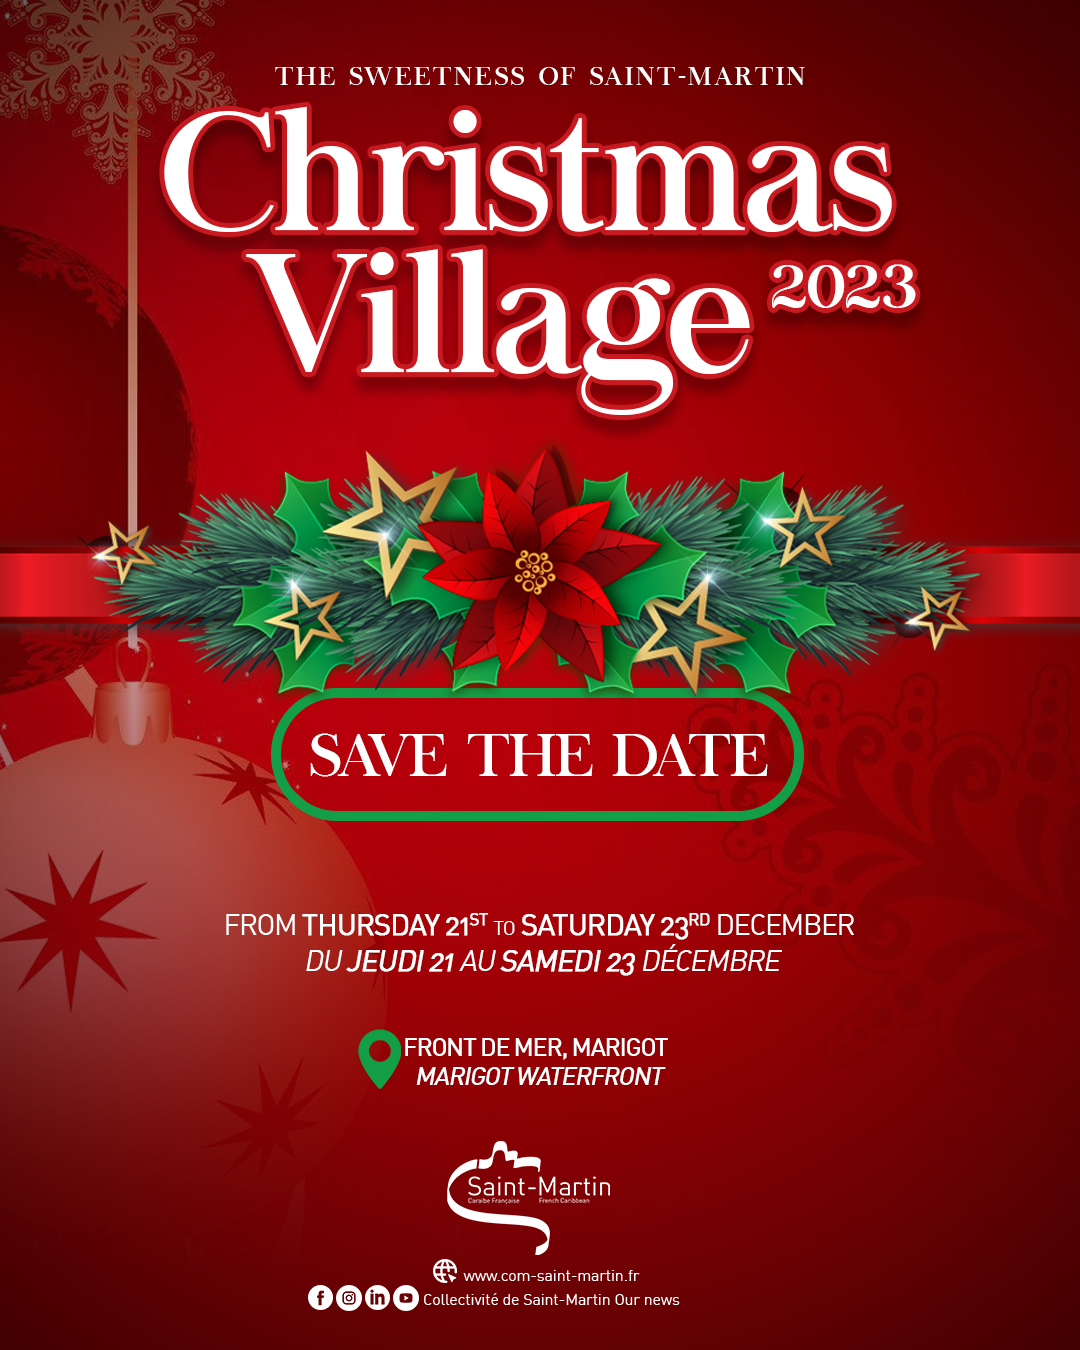 SAVE THE DATE - THE SWEETNESS OF SAINT-MARTIN CHRISTMAS VILLAGE 2023 !